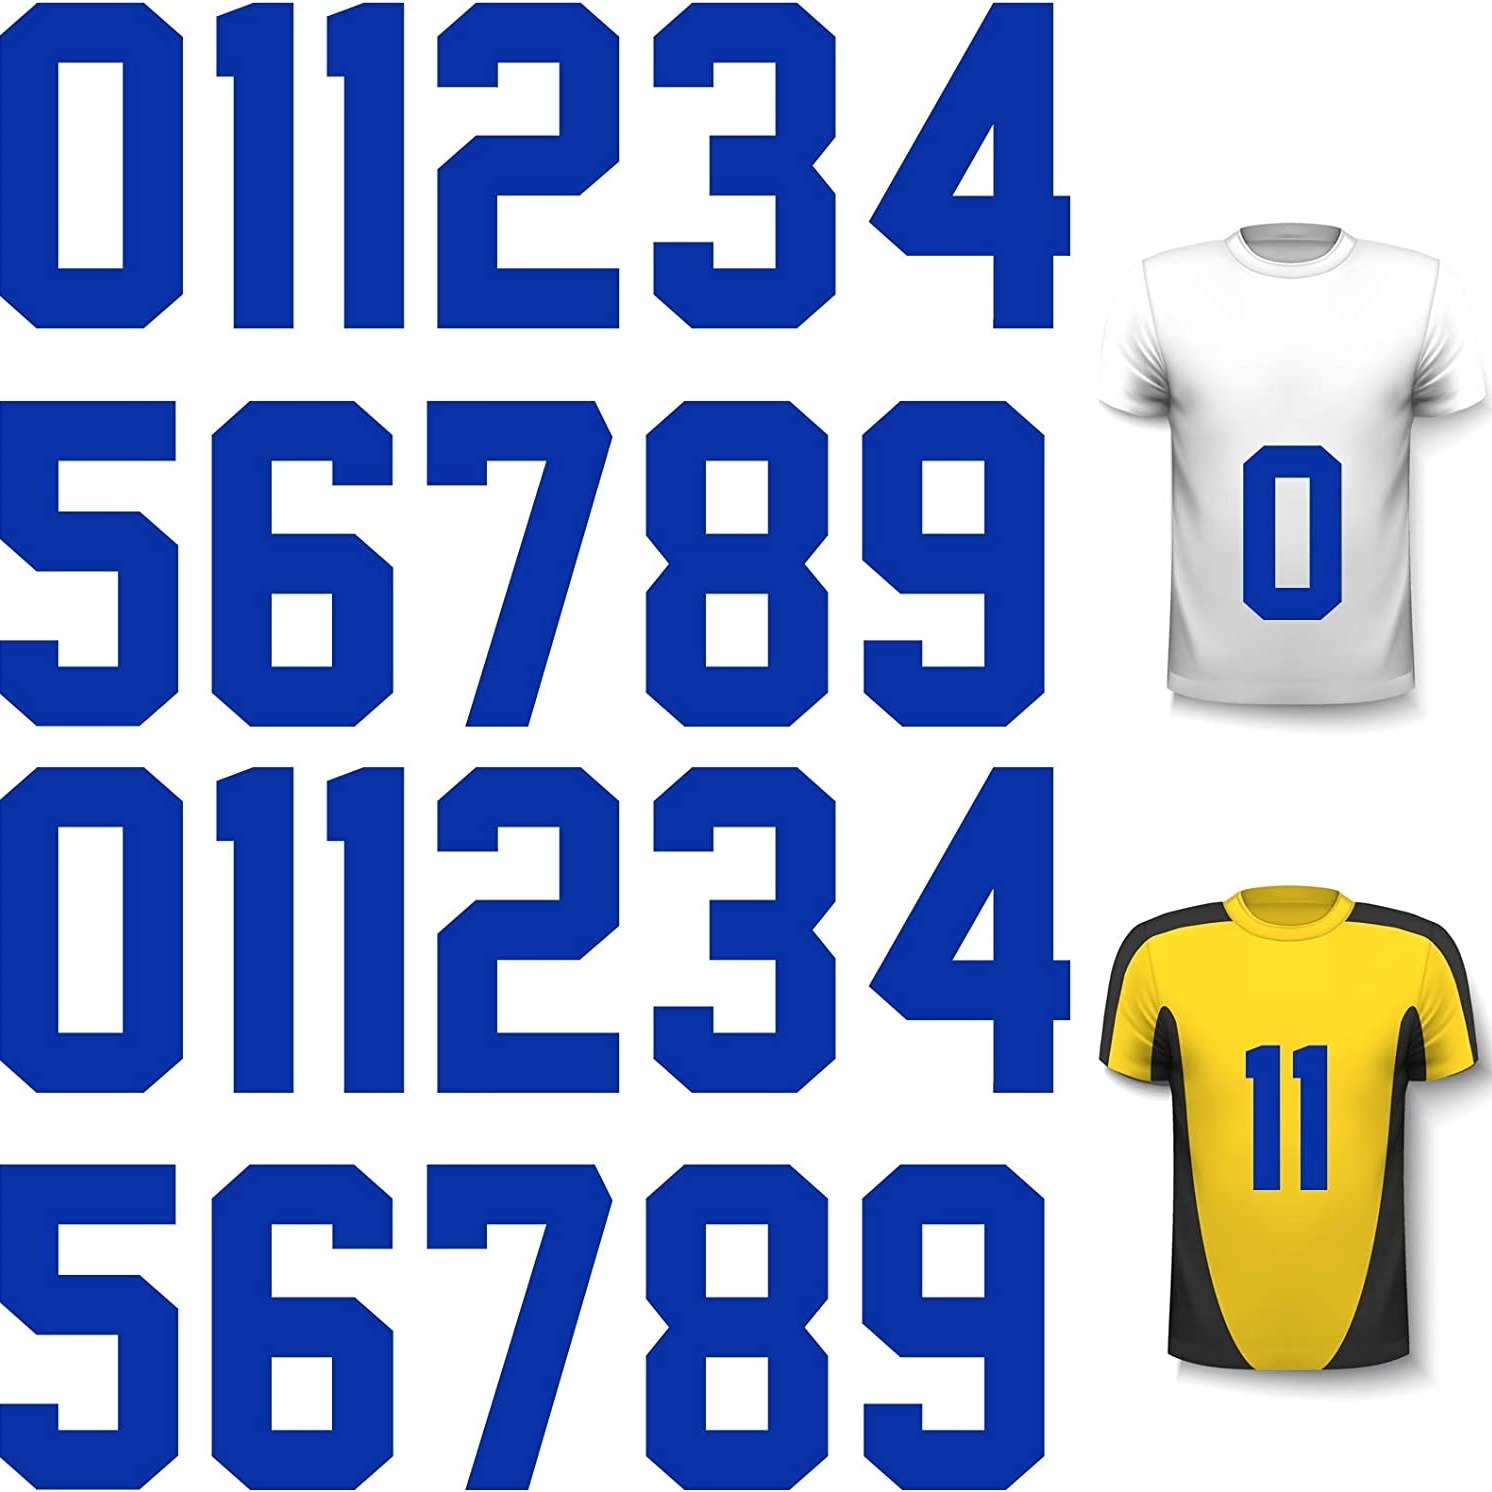 22 Pieces Heat Transfer Numbers 0 to 9 Jersey Numbers Soft Iron on Numbers  for Team Uniform Sports T…See more 22 Pieces Heat Transfer Numbers 0 to 9